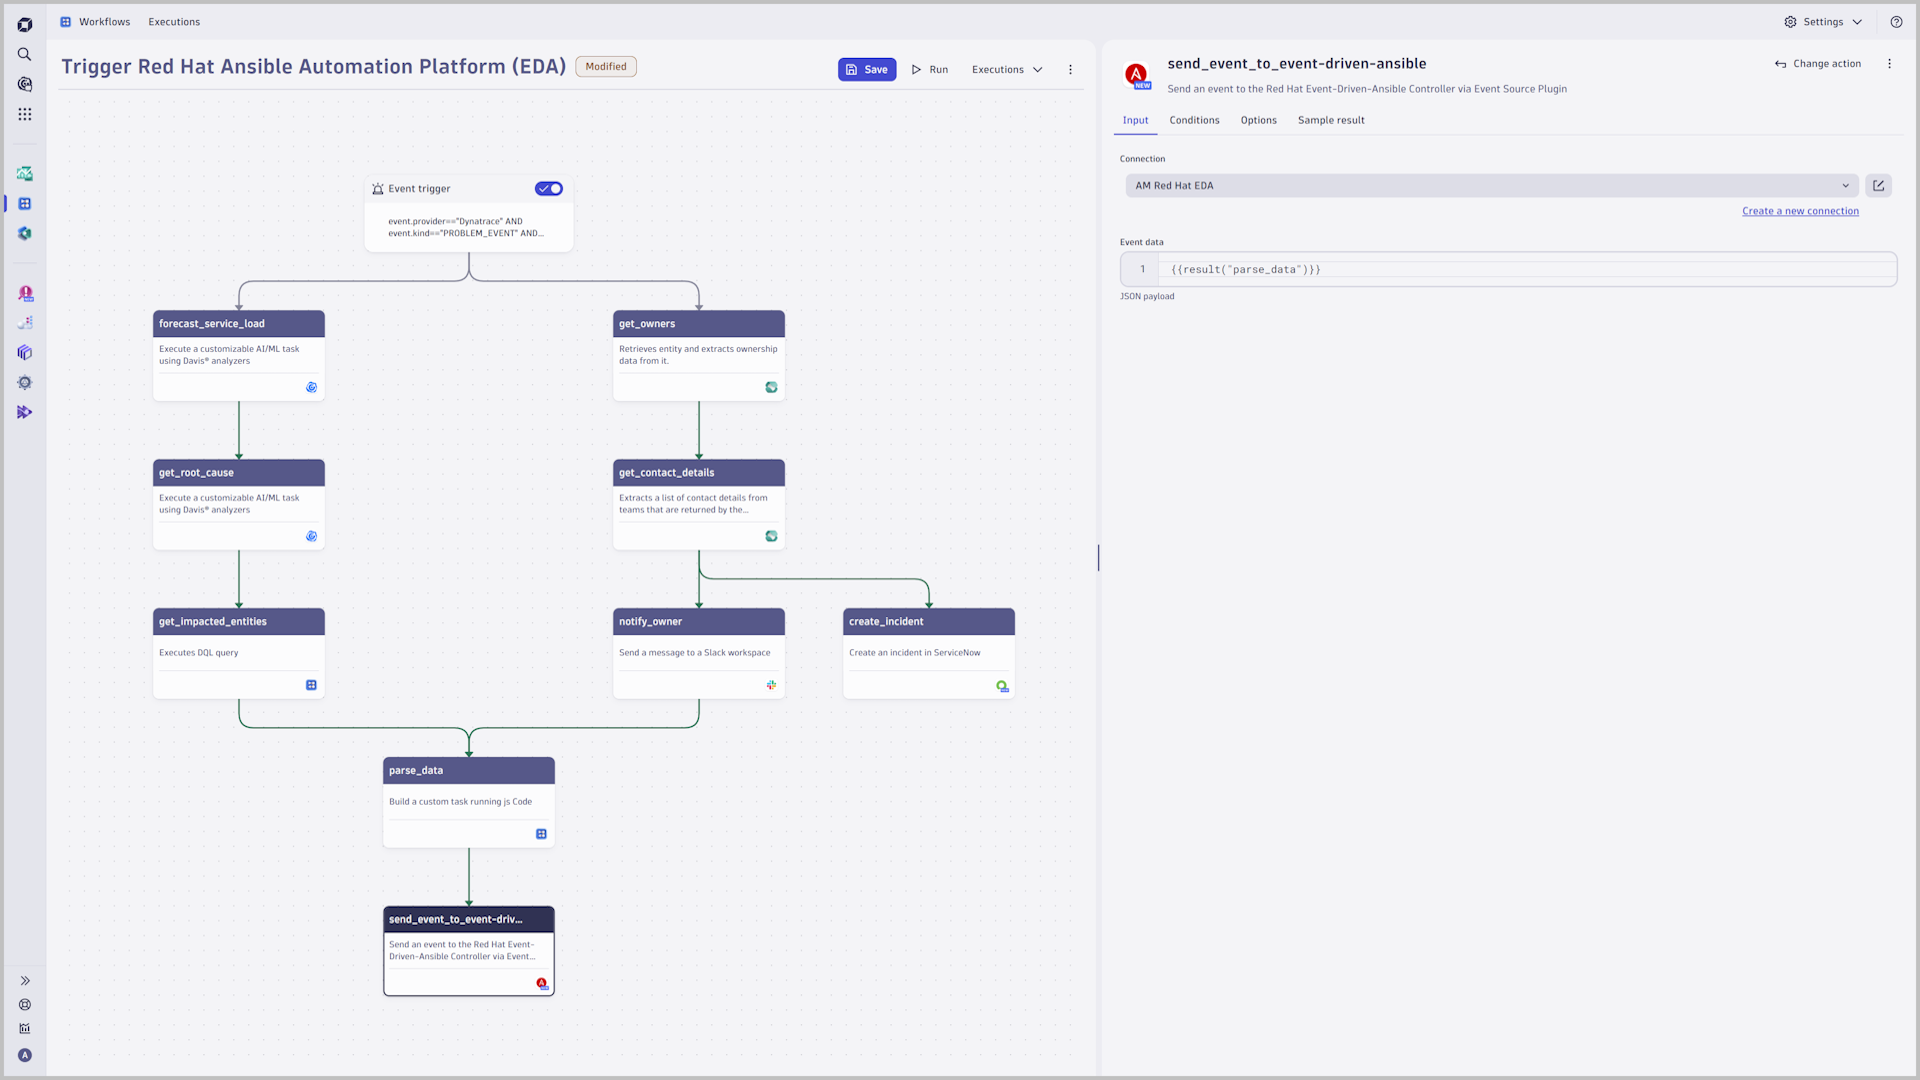 The integration of Dynatrace workflows with Red Hat Event-Driven Ansible provides the highest flexibility to remediate detected problems or to mitigate security vulnerabilities by leveraging rulebooks to identify the correct playbook.